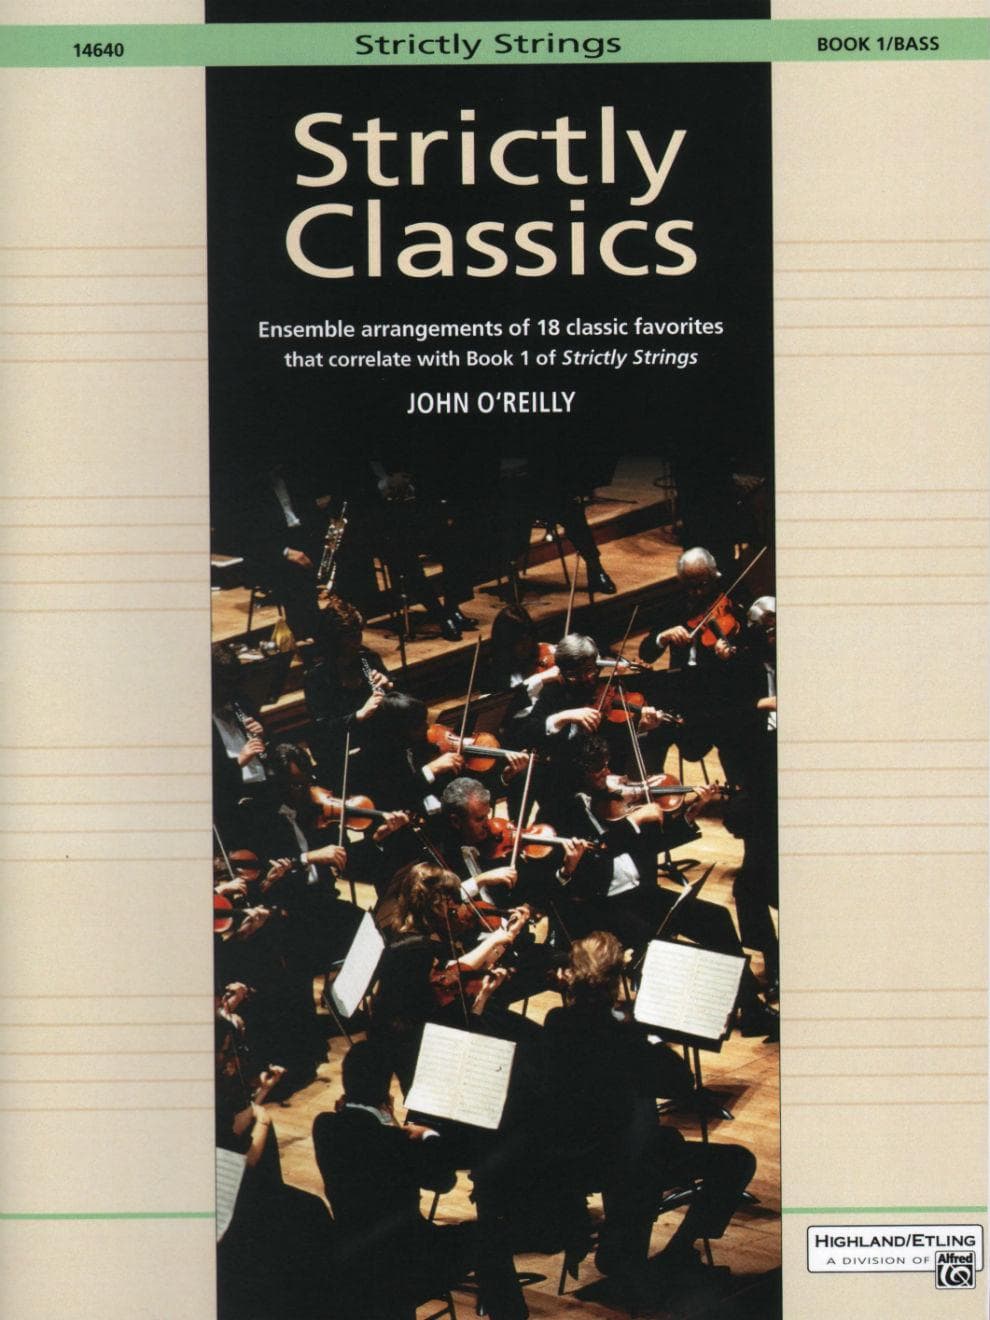 O'Reilly, John - Strictly Classics, Book 1, Bass Published by Neil A Kjos Music Company